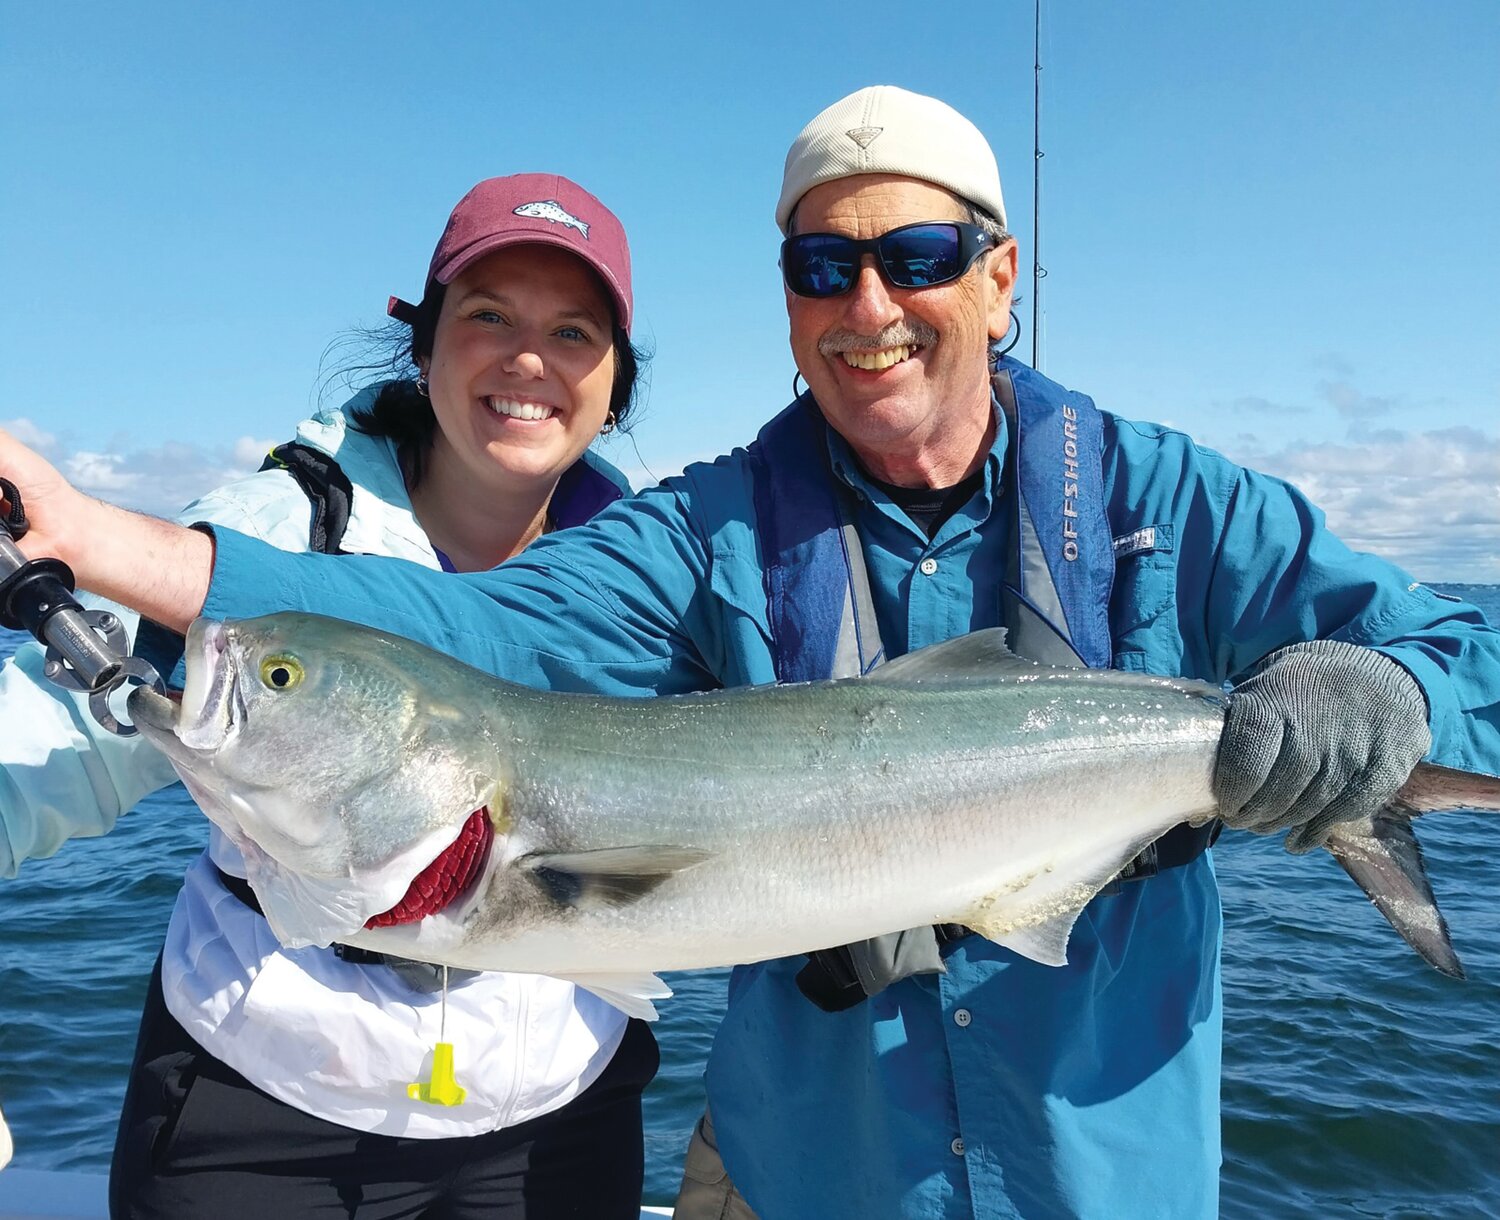 WHAT’S THE CATCH: Bluefish regulations will likely be the same as last year, three fish/person/day, no minimum size, includes skipjack bluefish. Shaina Boyle caught this 36-inch bluefish last year fishing with Capt. Dave Monti. (Submitted photo)